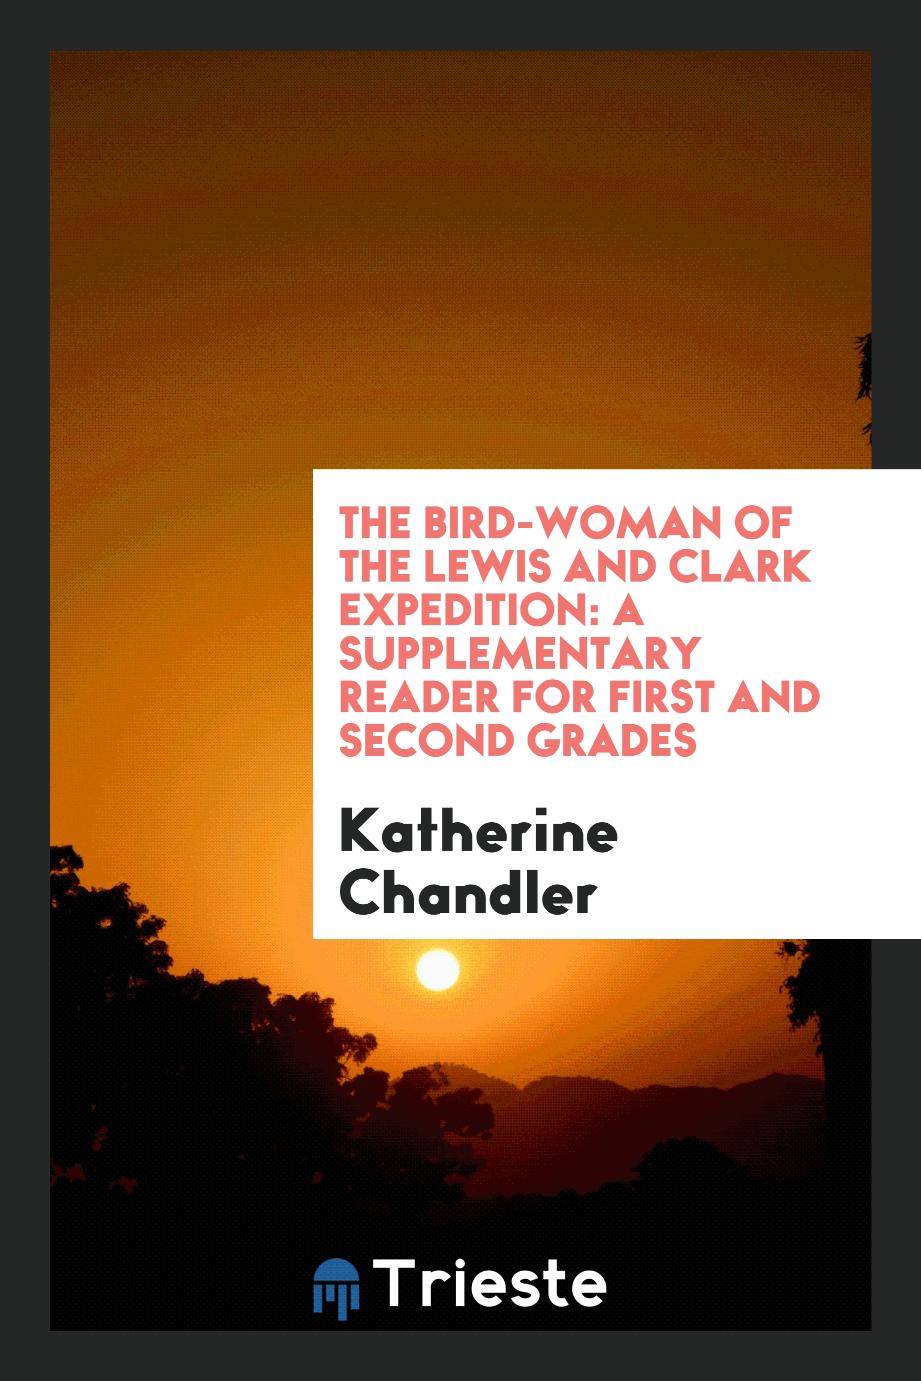 The Bird-woman of the Lewis and Clark Expedition: A Supplementary Reader for First and Second Grades